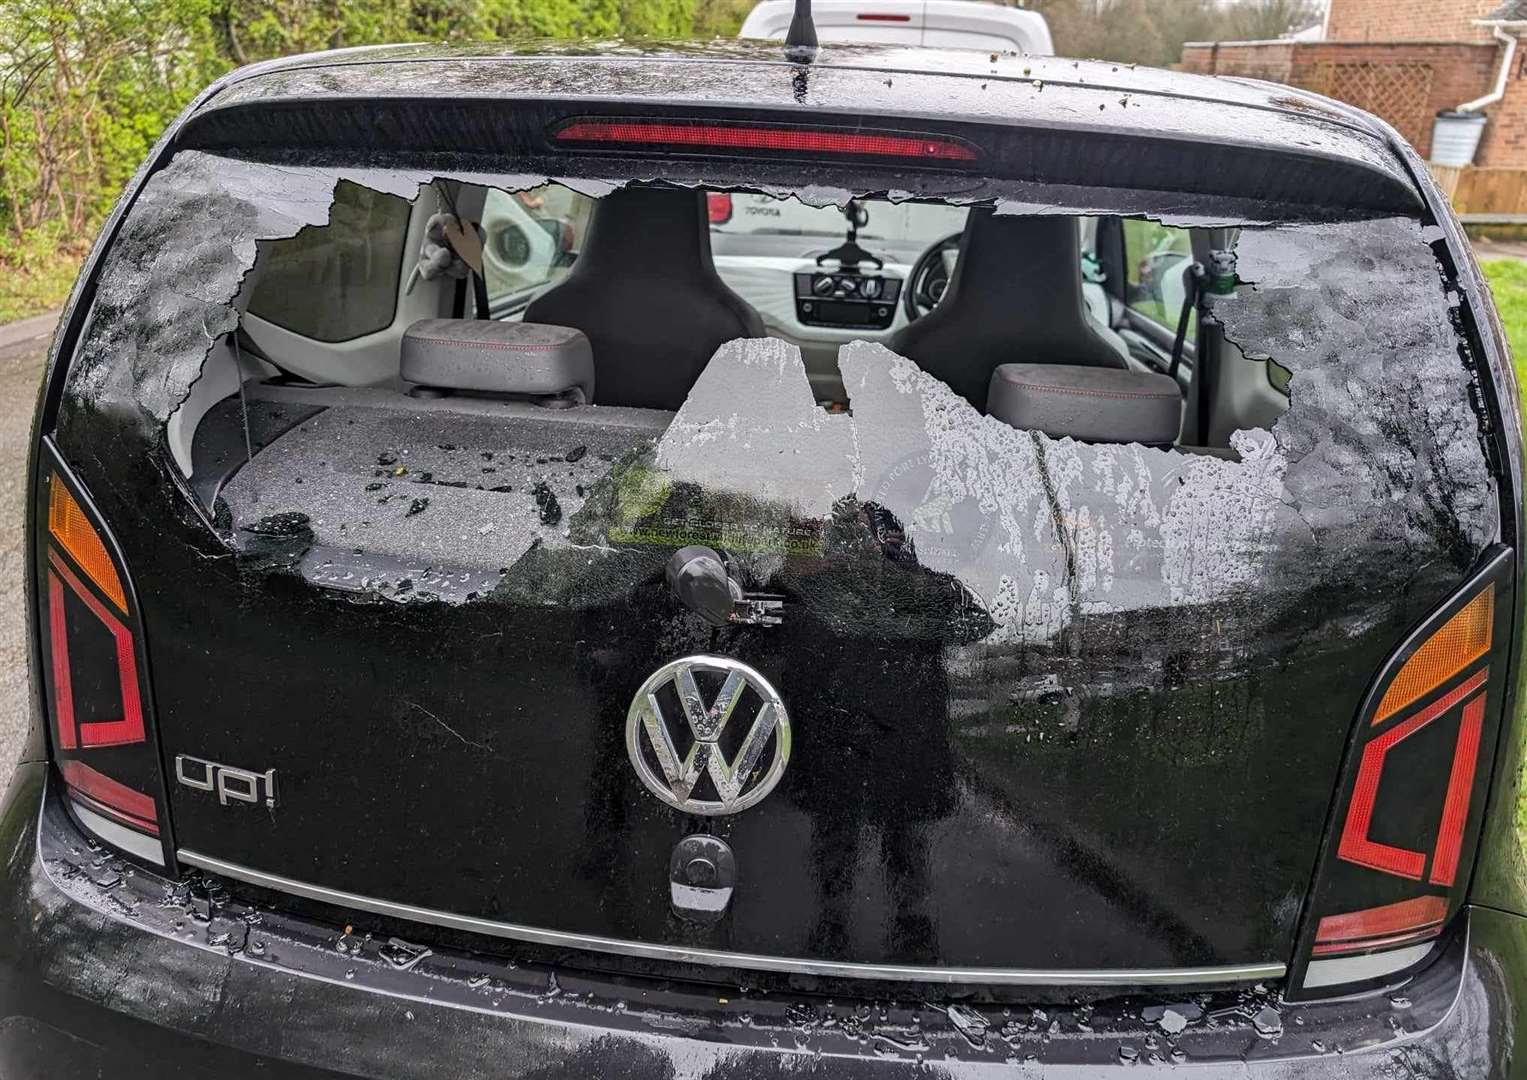 Jess Greenwood's Volkswagen Up! was targeted by vandals in East Lodge Road in Godinton